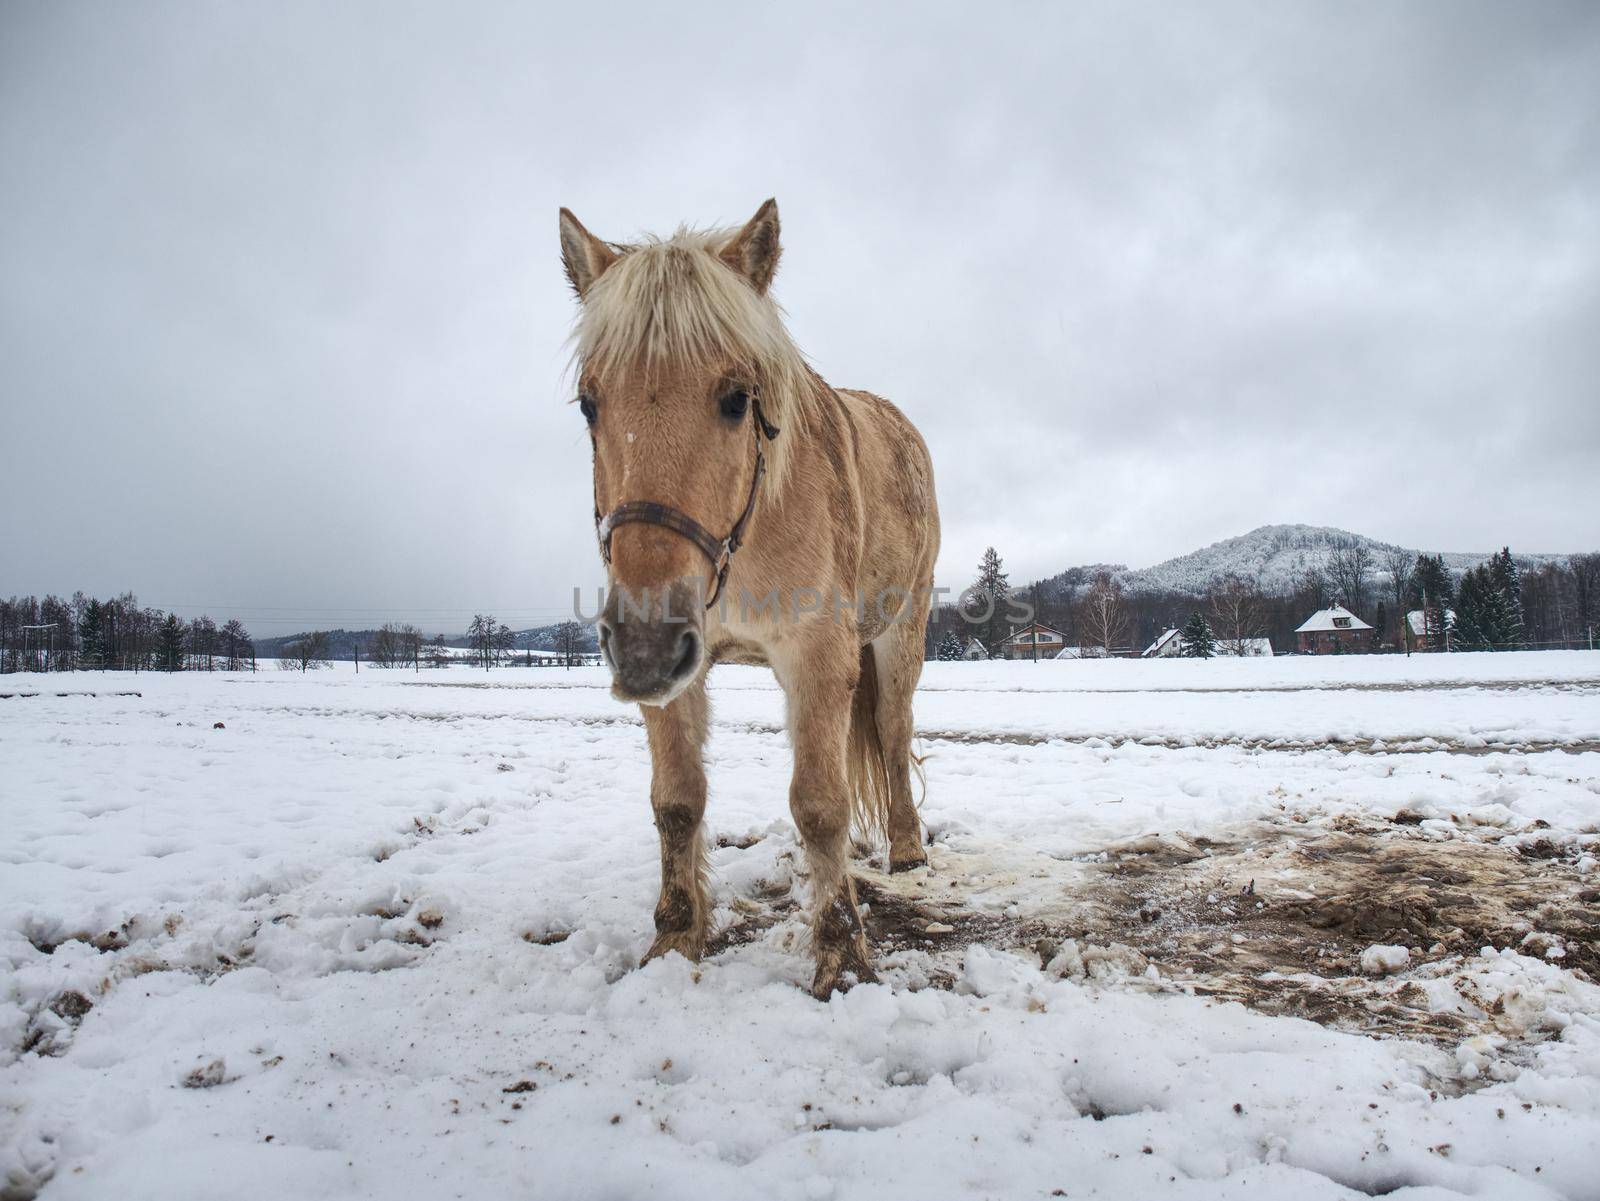 White horse in winter meadow. Wet dirty horse  by rdonar2